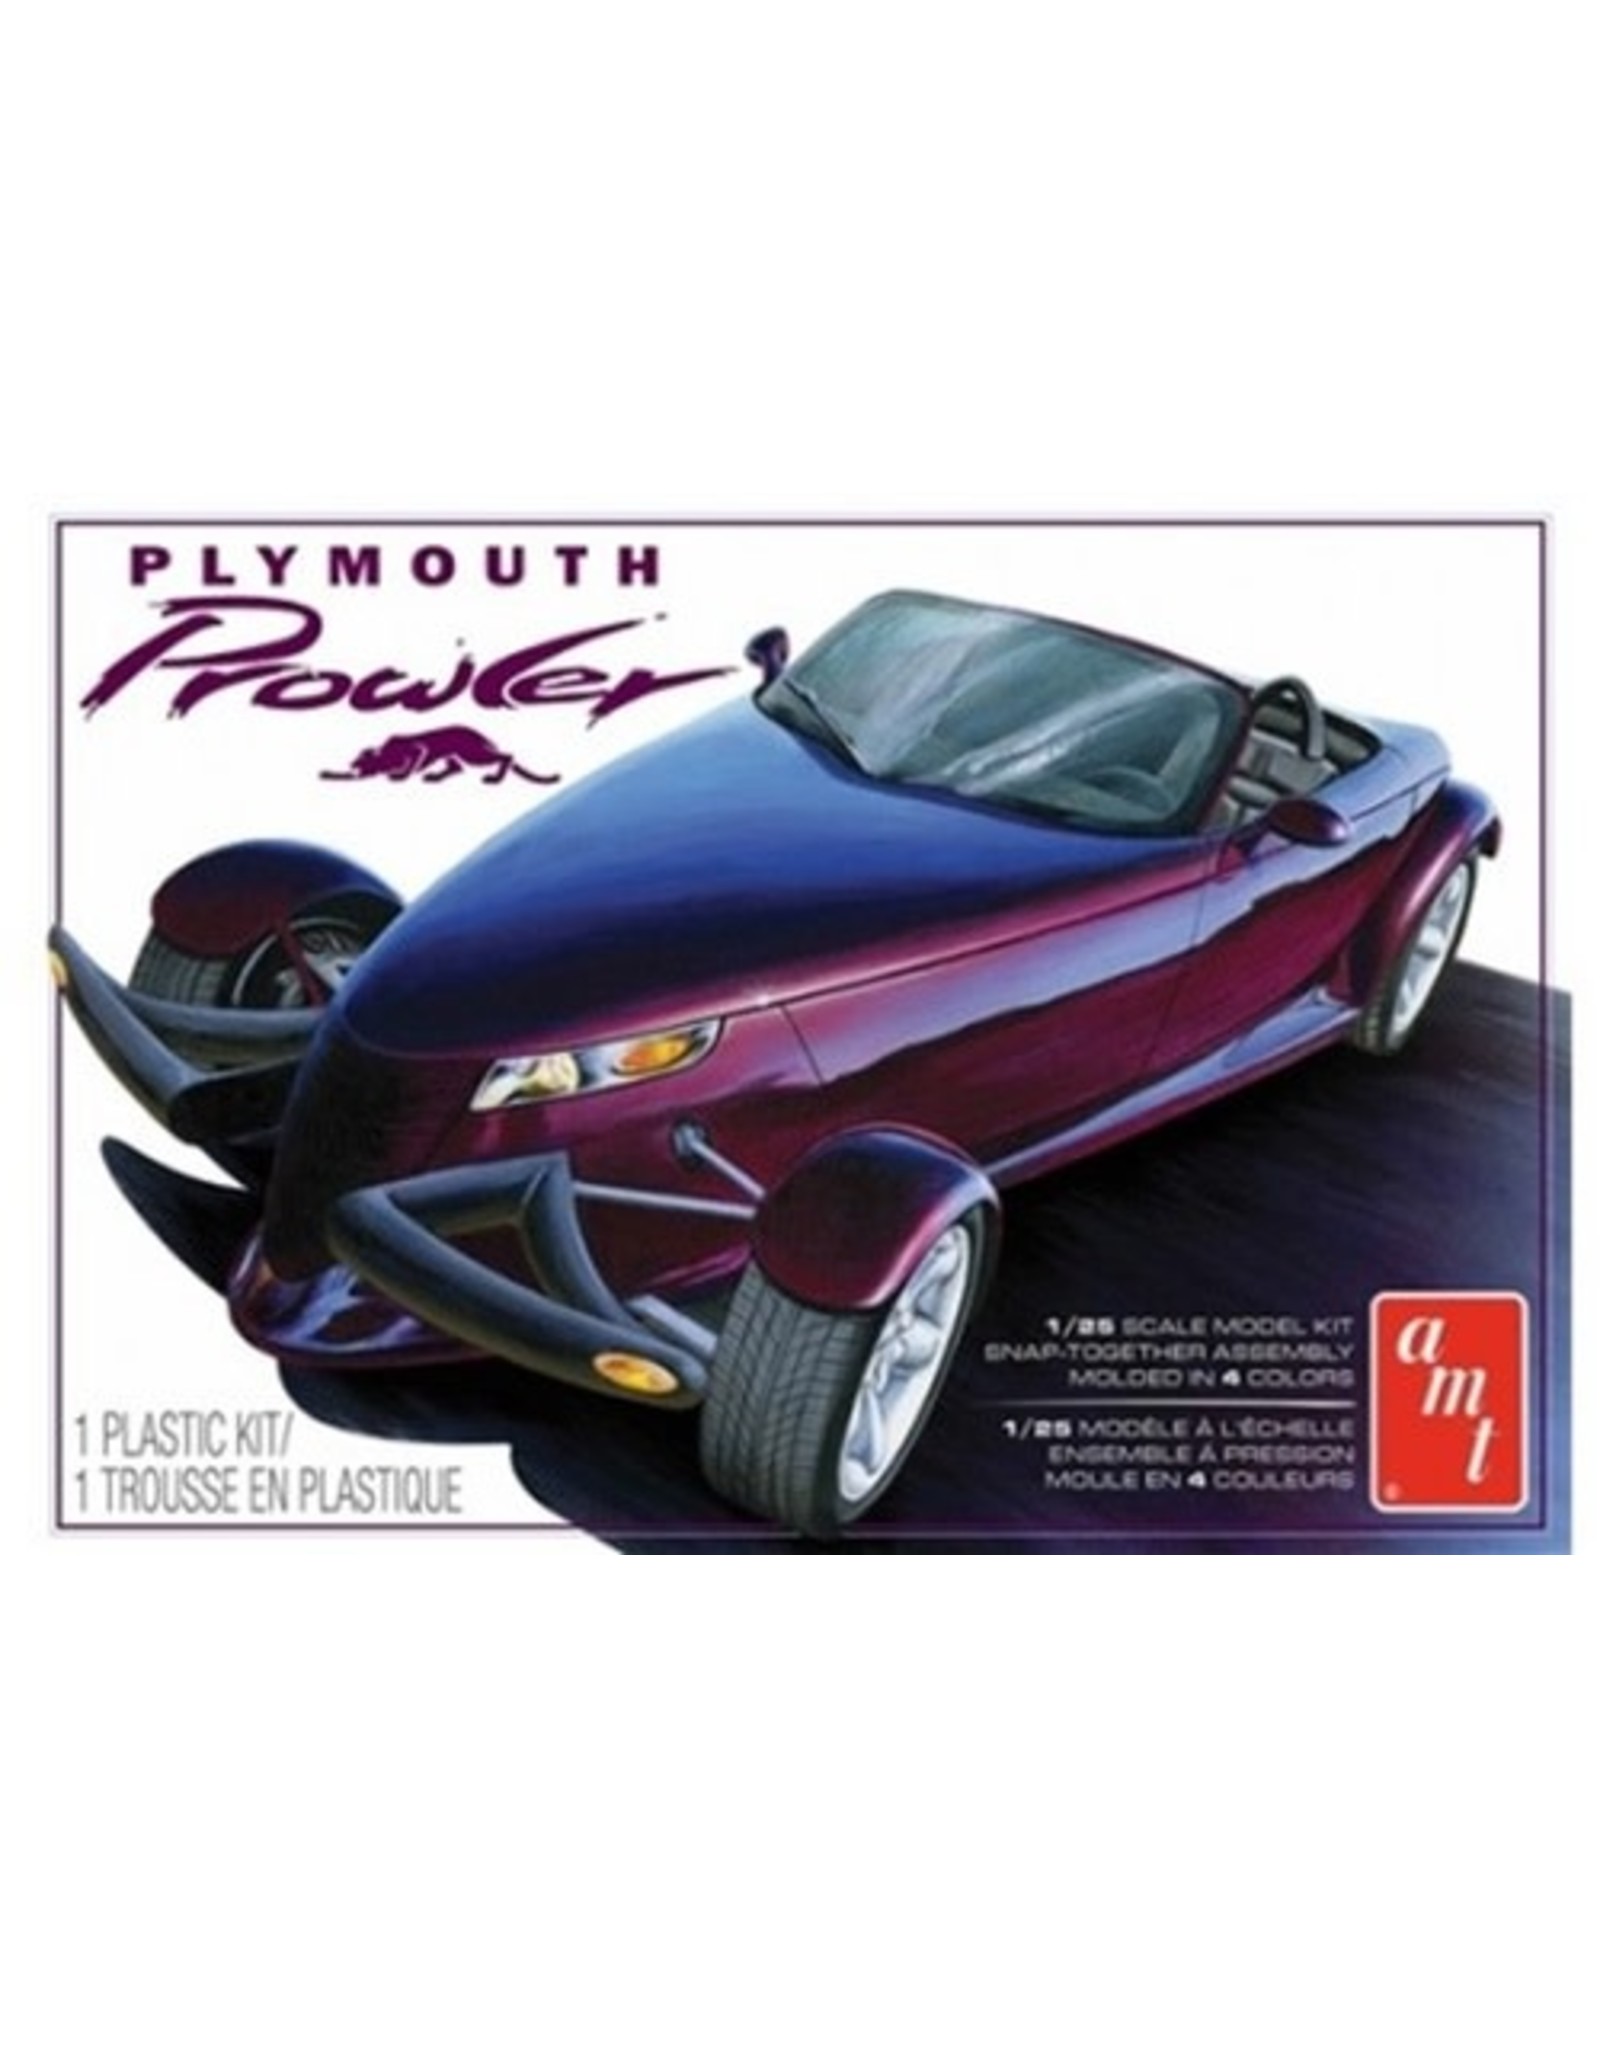 amt Plymouth prowler